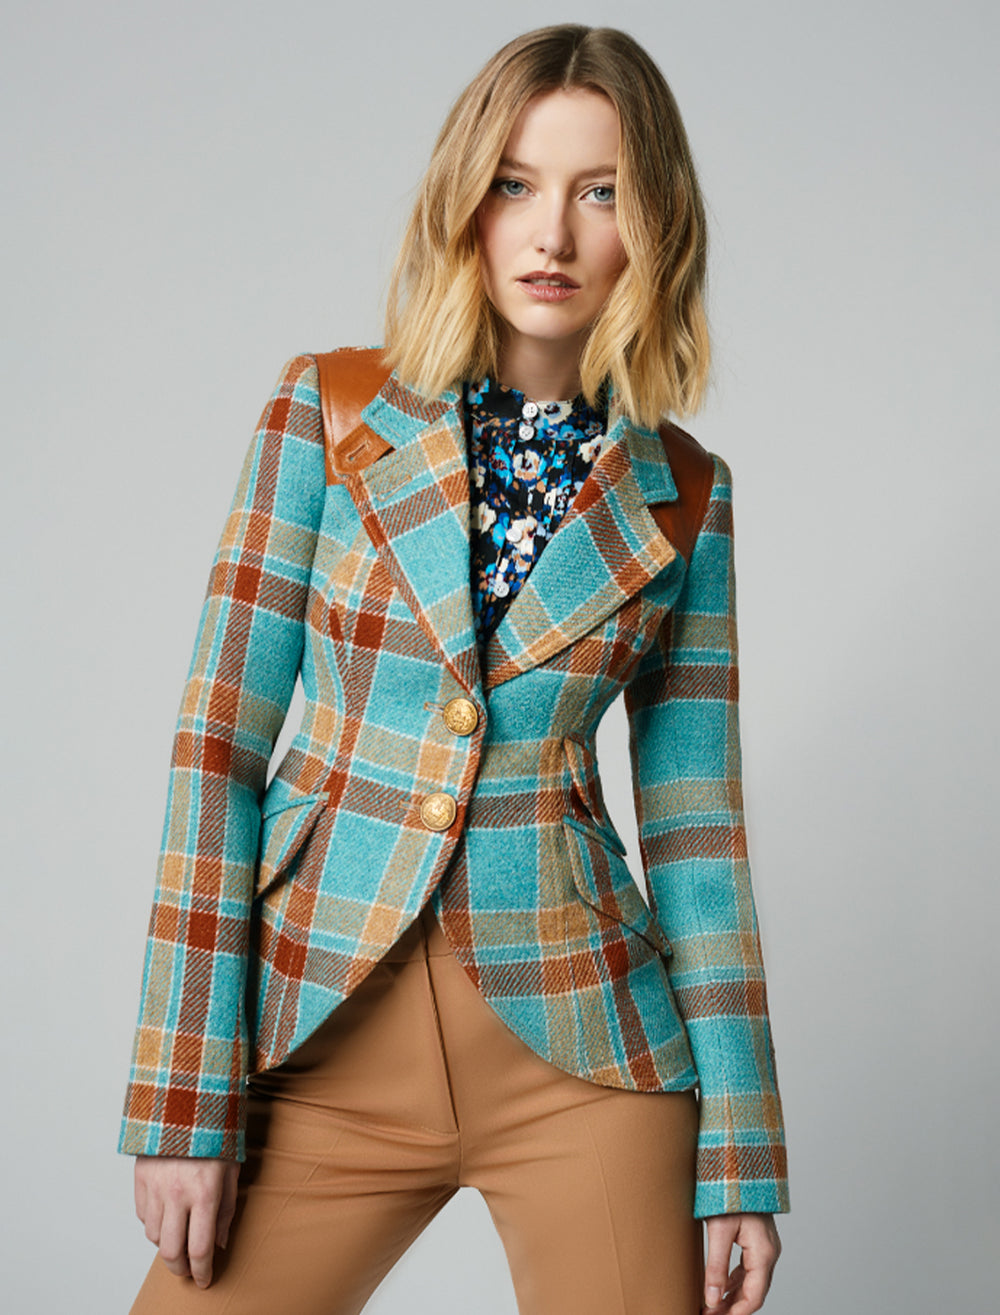 Model wearing Smythe's hunting blazer in blue and rust plaid.